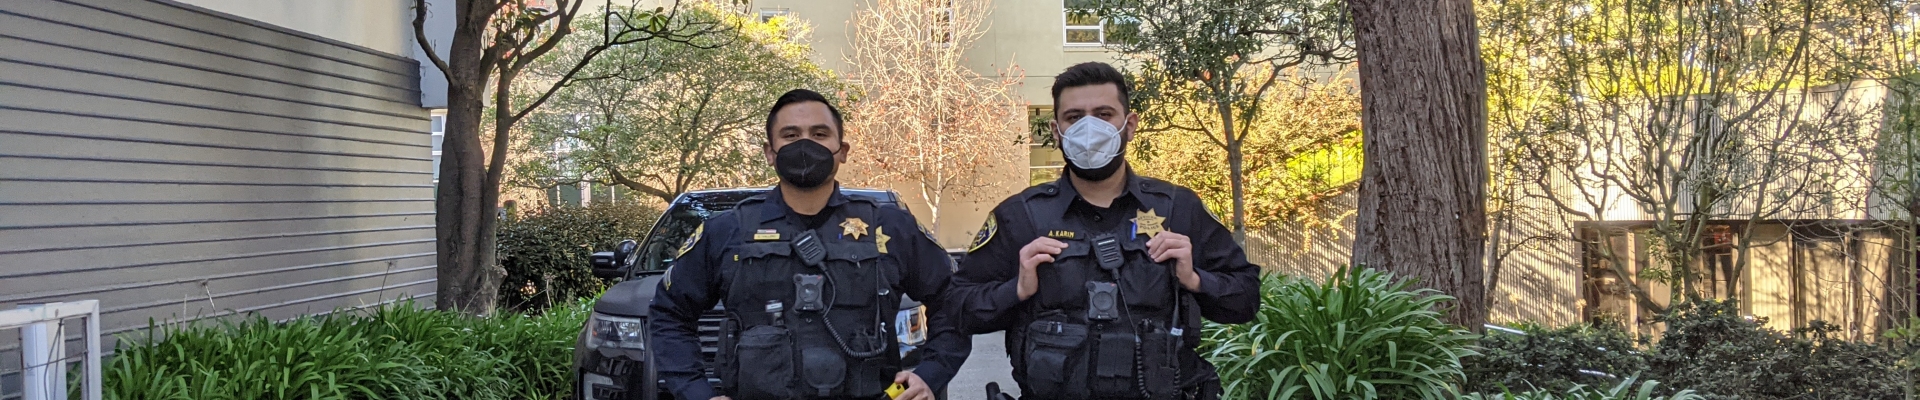 UPD Officers on foot patrol near the Student Health Center